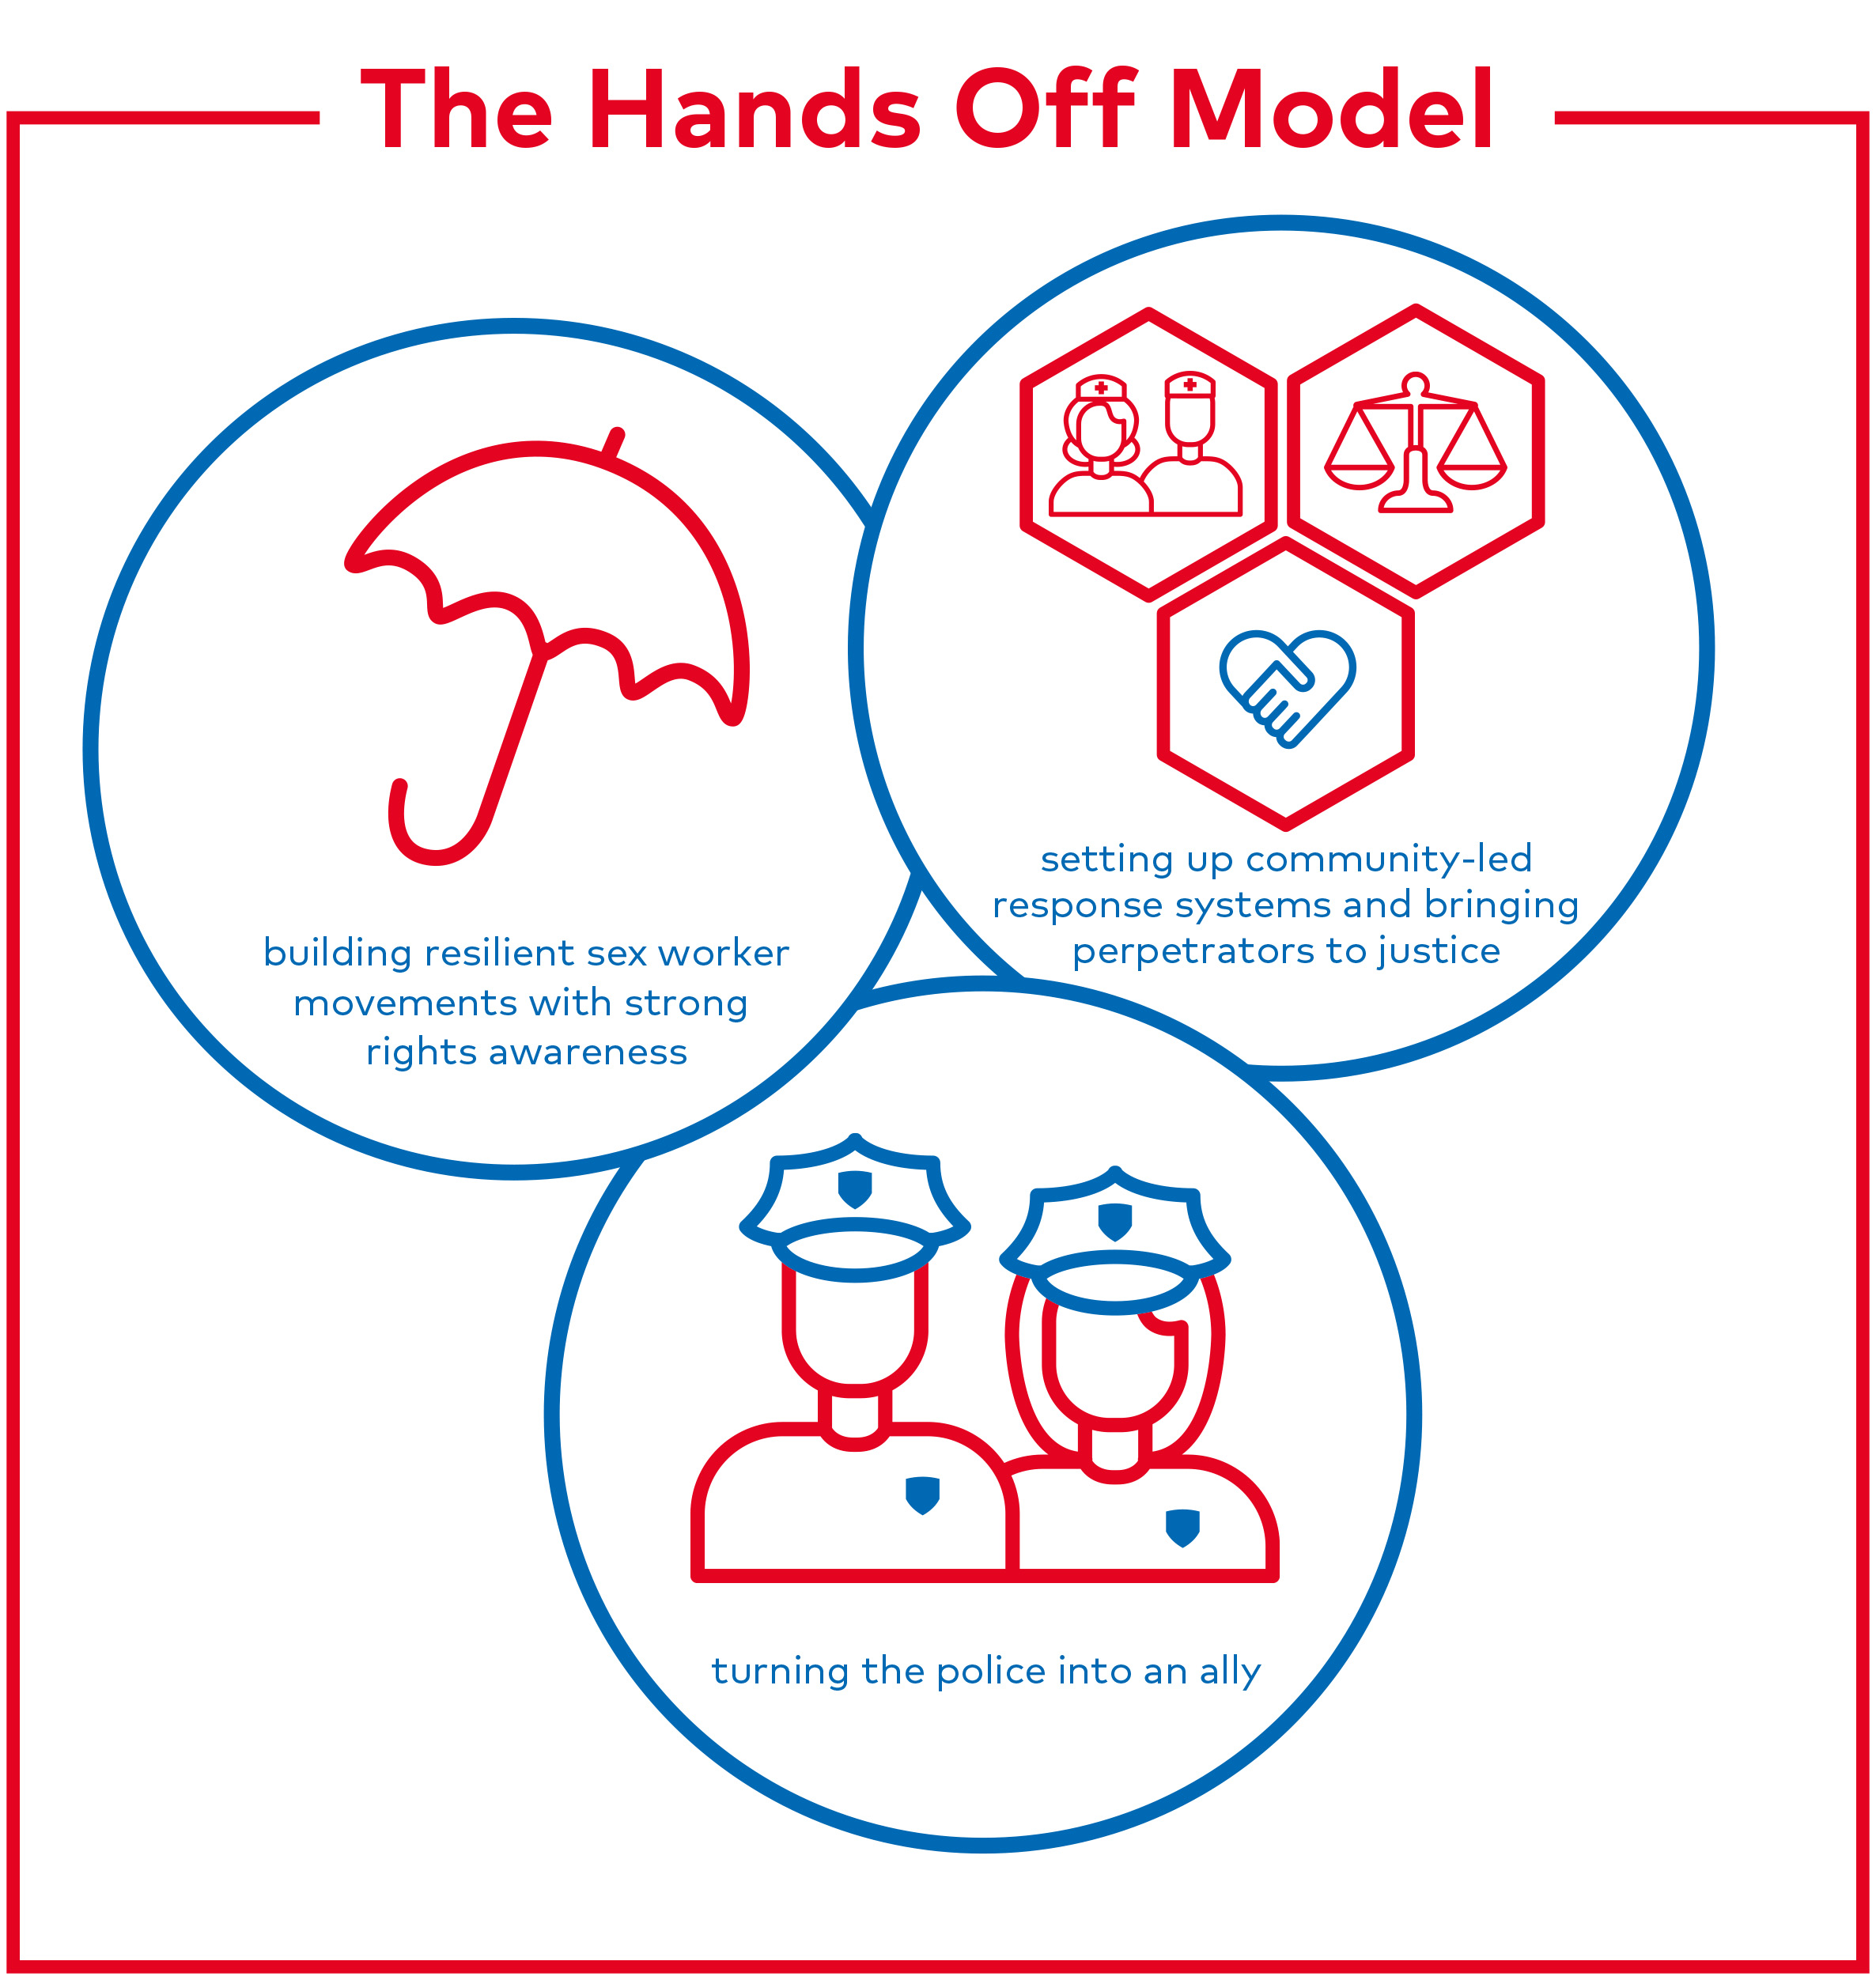 The Hands Off model, involving three key intervention strategies, has proven to contribute to a reduction in violence, an empowered sex worker movement and greater accessibility and uptake of services by sex workers. Only if the following three interventions are implemented simultaneously, violence against sex workers can be reduced: 1) involve the police in the HIV response and make them an ally, 2) bring perpetrators to justice and employ emergency response for survivors of violence, 3) build a sex worker movement with strong awareness of its rights